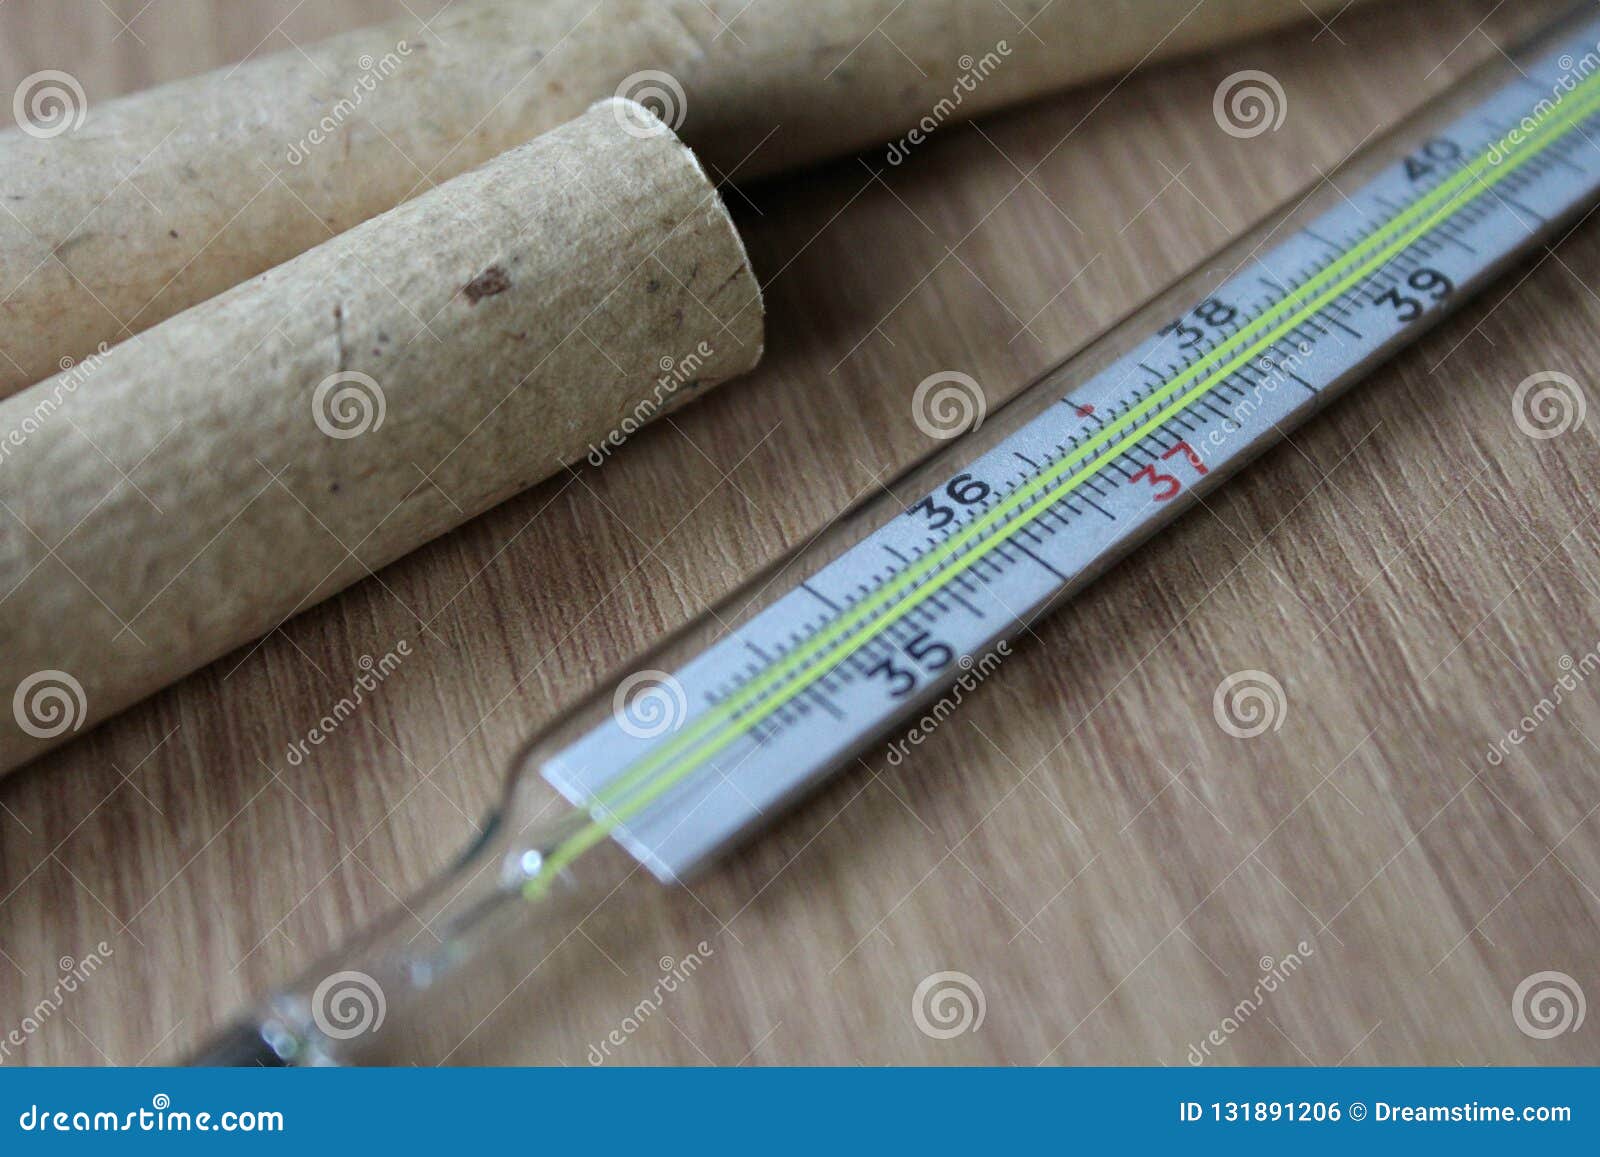 medical thermometer mercurial with temperature to measure the body temperature